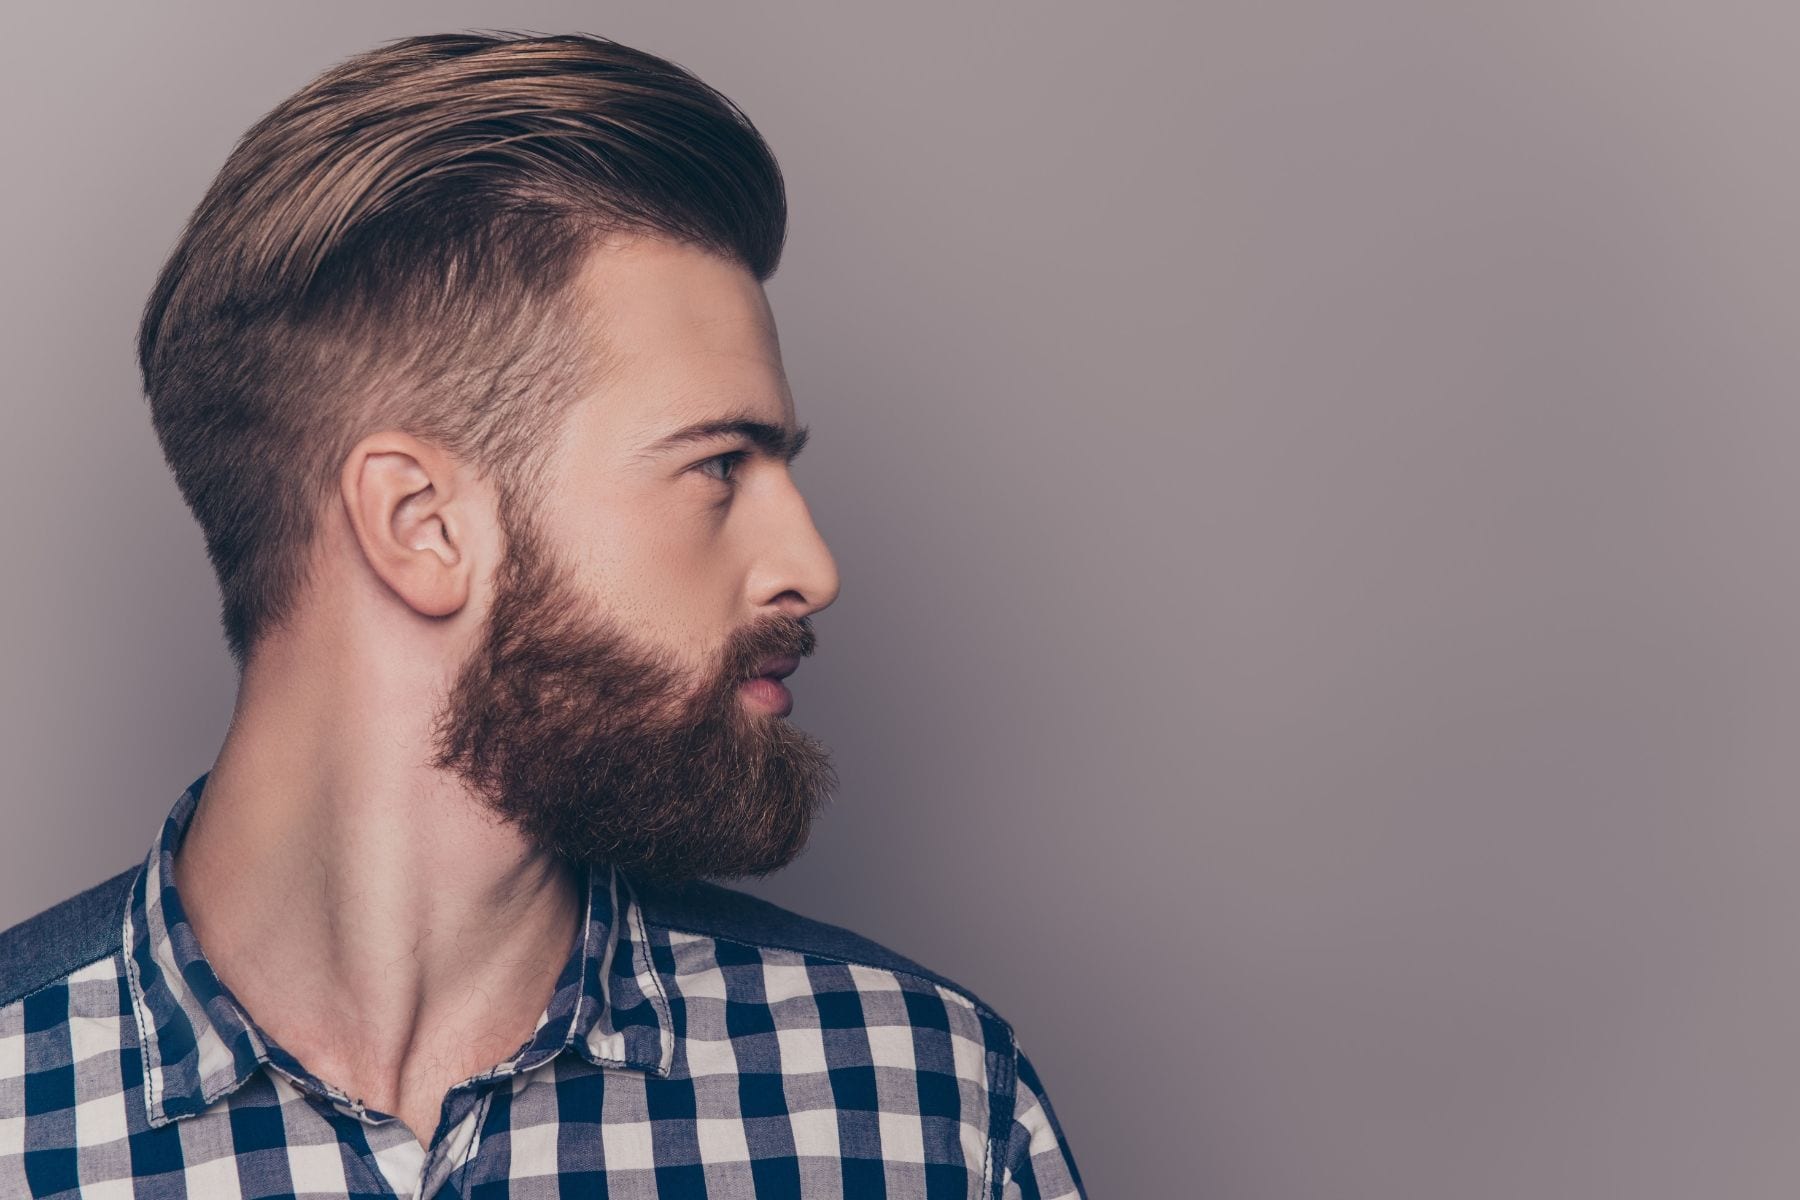 How to Trim a Beard Successfully